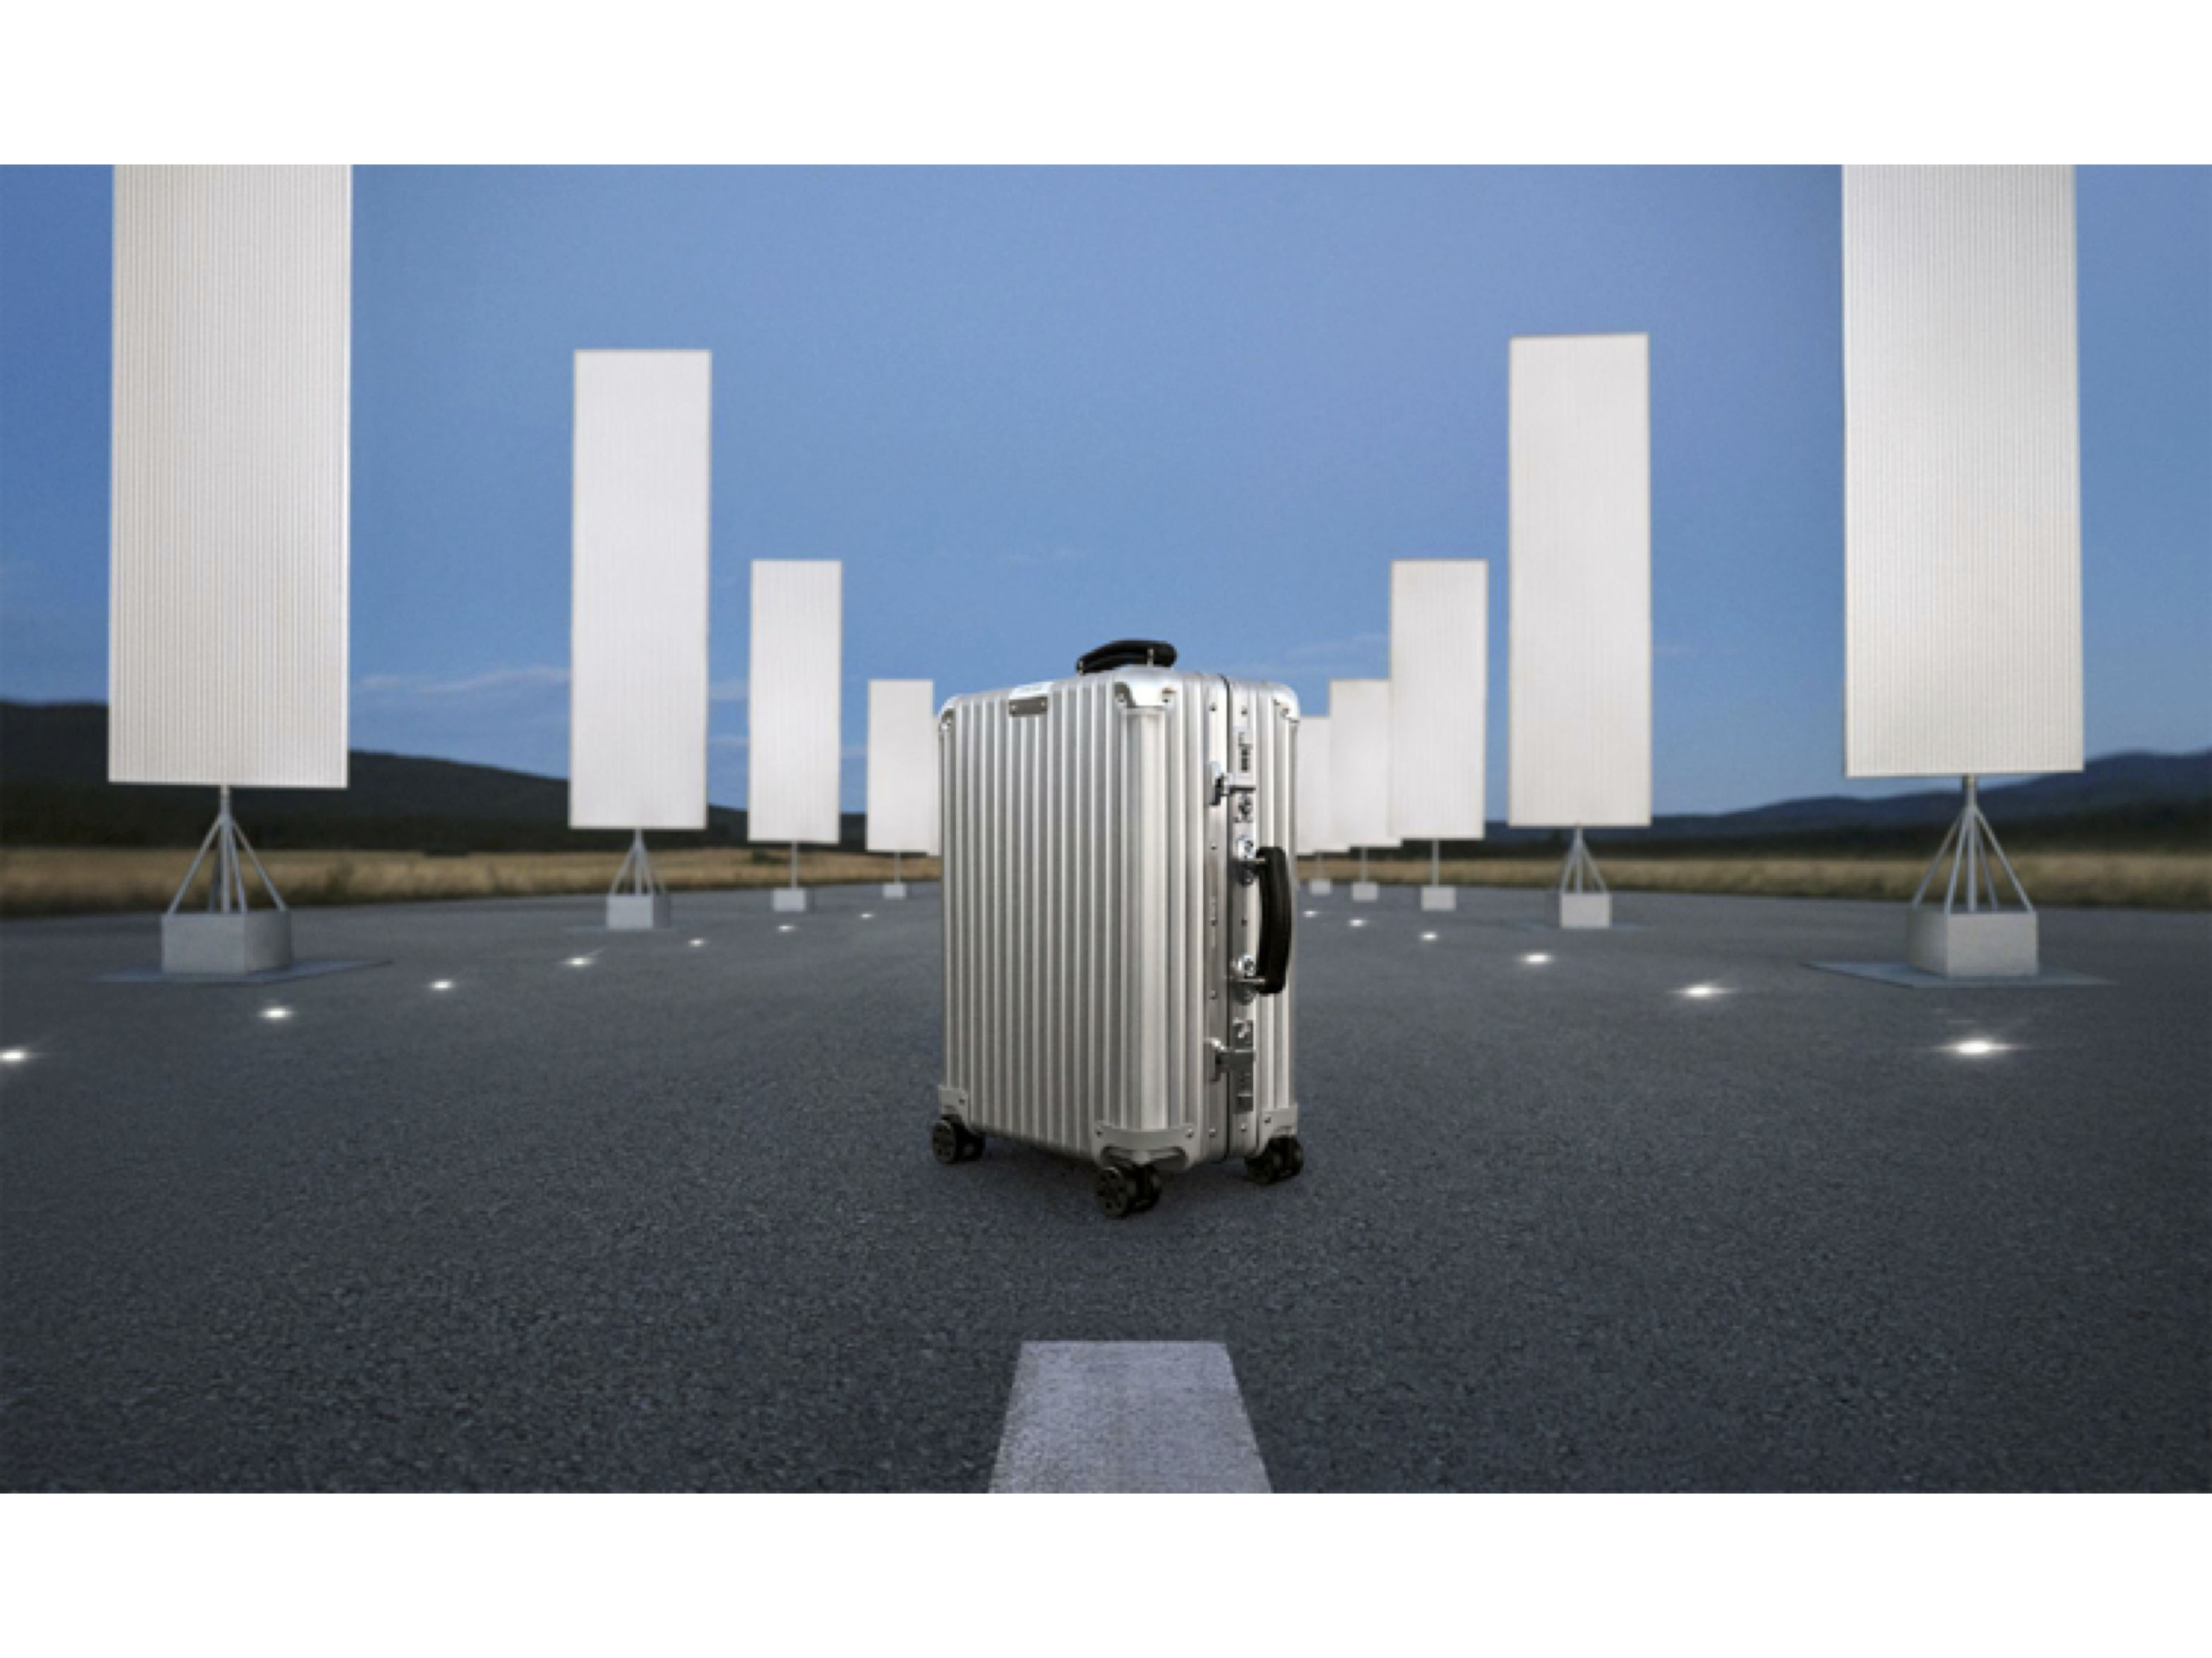 Daft Punk soundtracks campaign by Anomaly for luggage brand RIMOWA - turning engineering into art